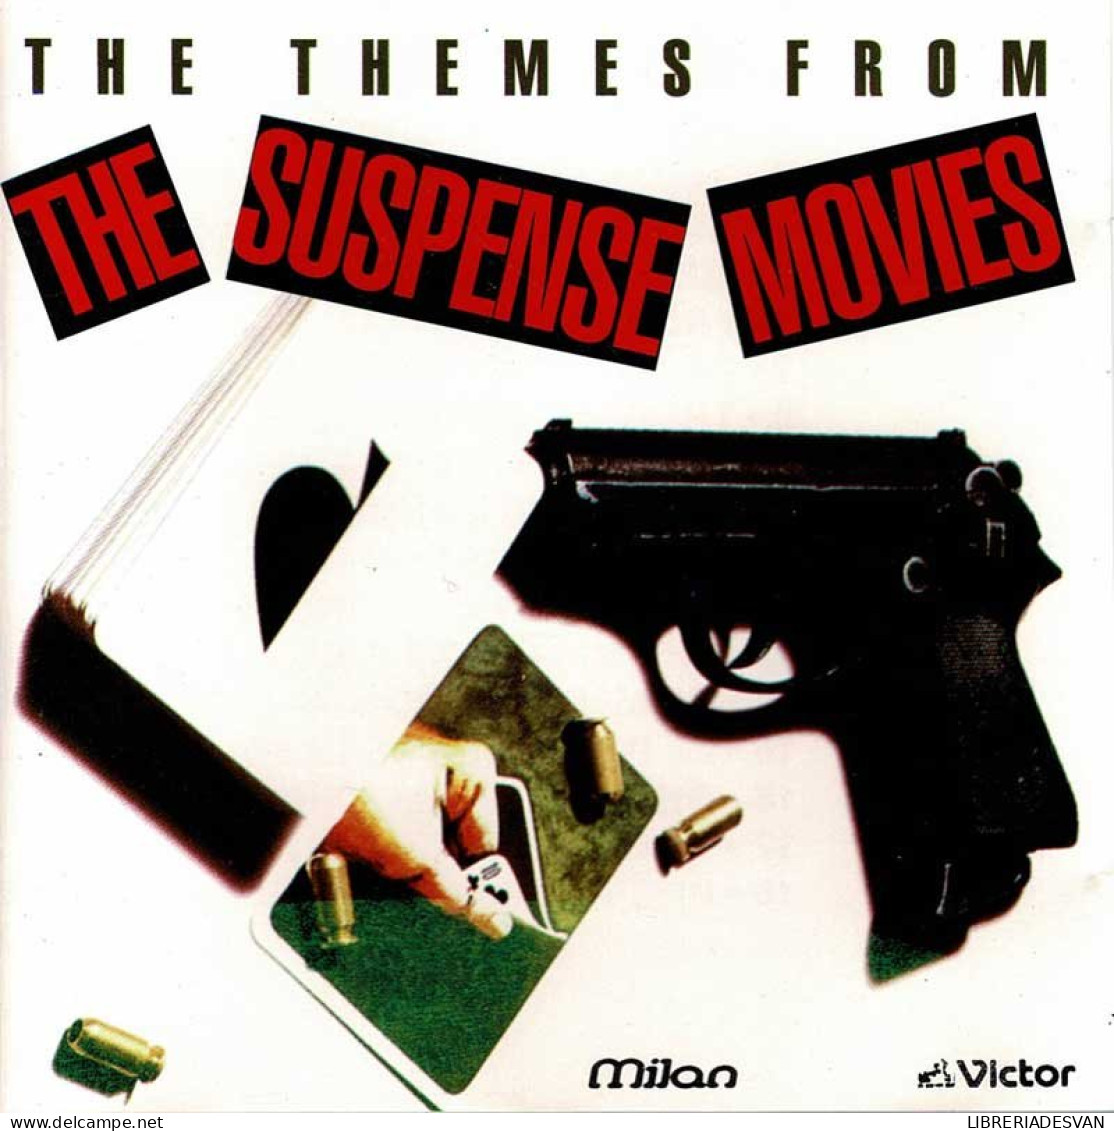 The Themes From The Suspense Movies. CD - Musique De Films